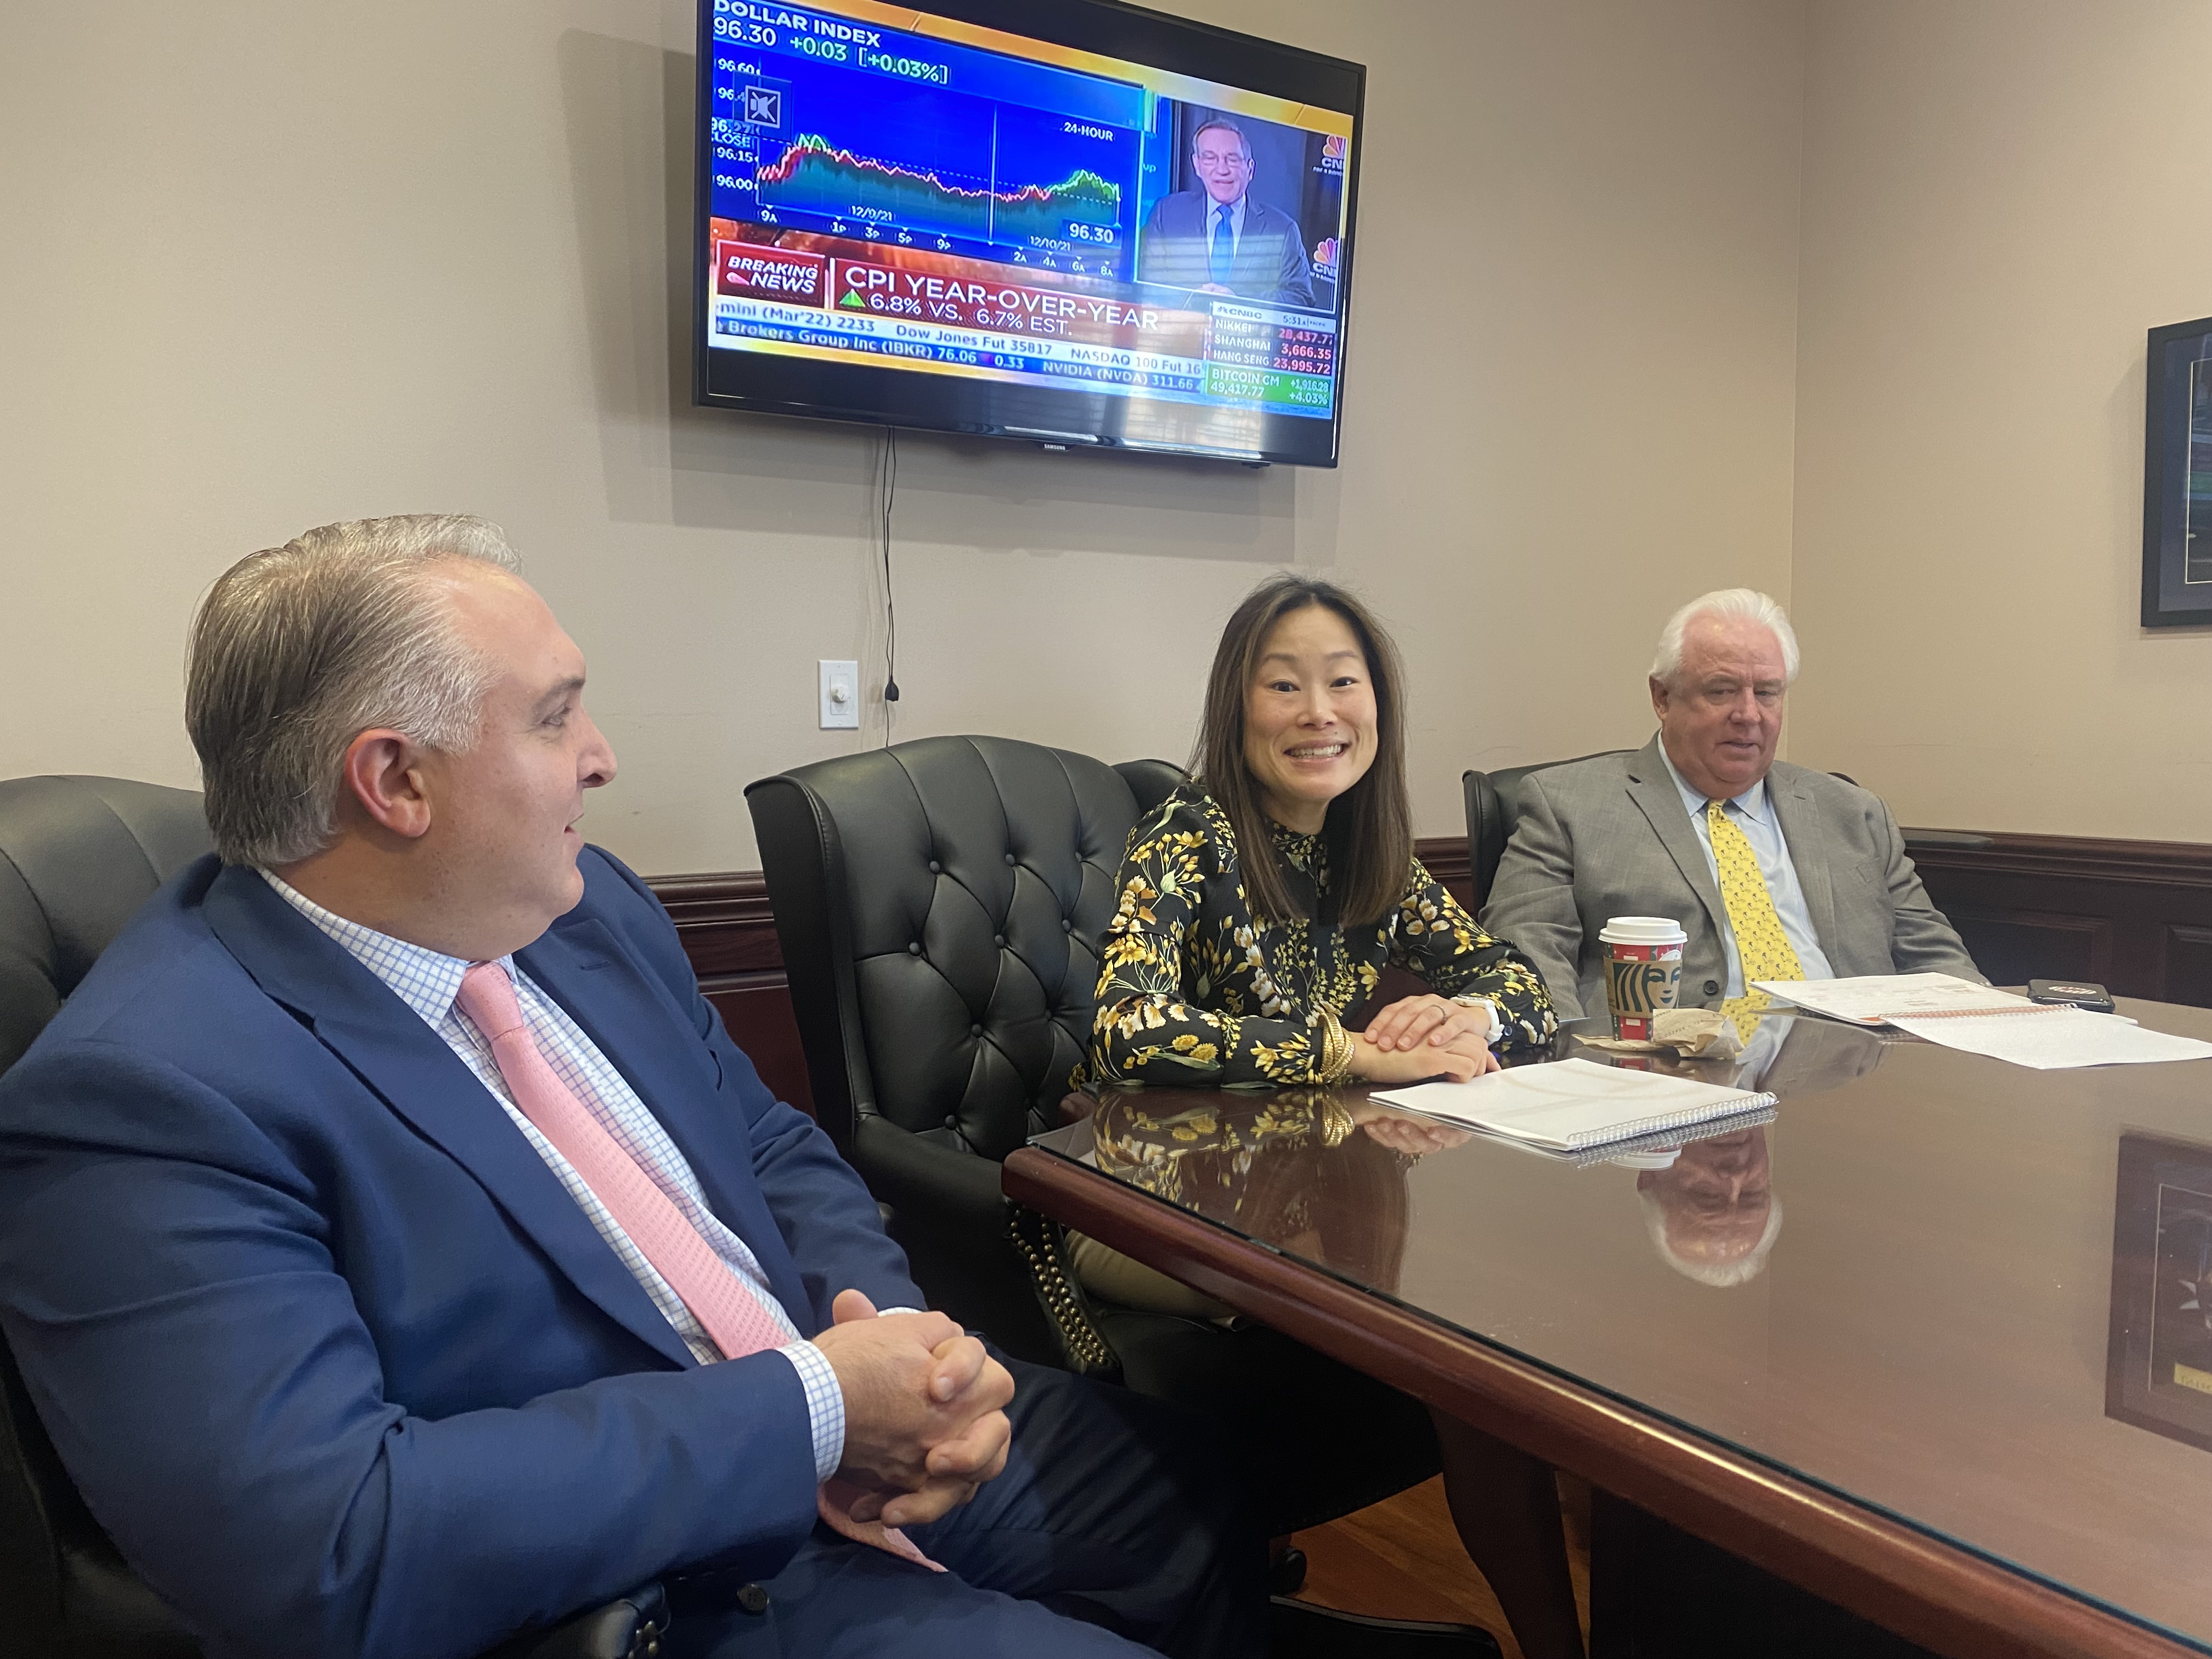 December 10, 2021: The Board of Trustees had the pleasure of receiving a portfolio review from EnTrust Global. Ms. Sophia Mullen was joined by Mr. Mark Guariglia & Mr. Jeffrey Marano to discuss the ETG Co-Invest Opportunities Fund. The Fund committed to a 20 million dollar investment in June of 2020. To date 47% of that commitment has been called and put to work on behalf of the Fund. The Inception to date return  is 16.49% (Net IRR).